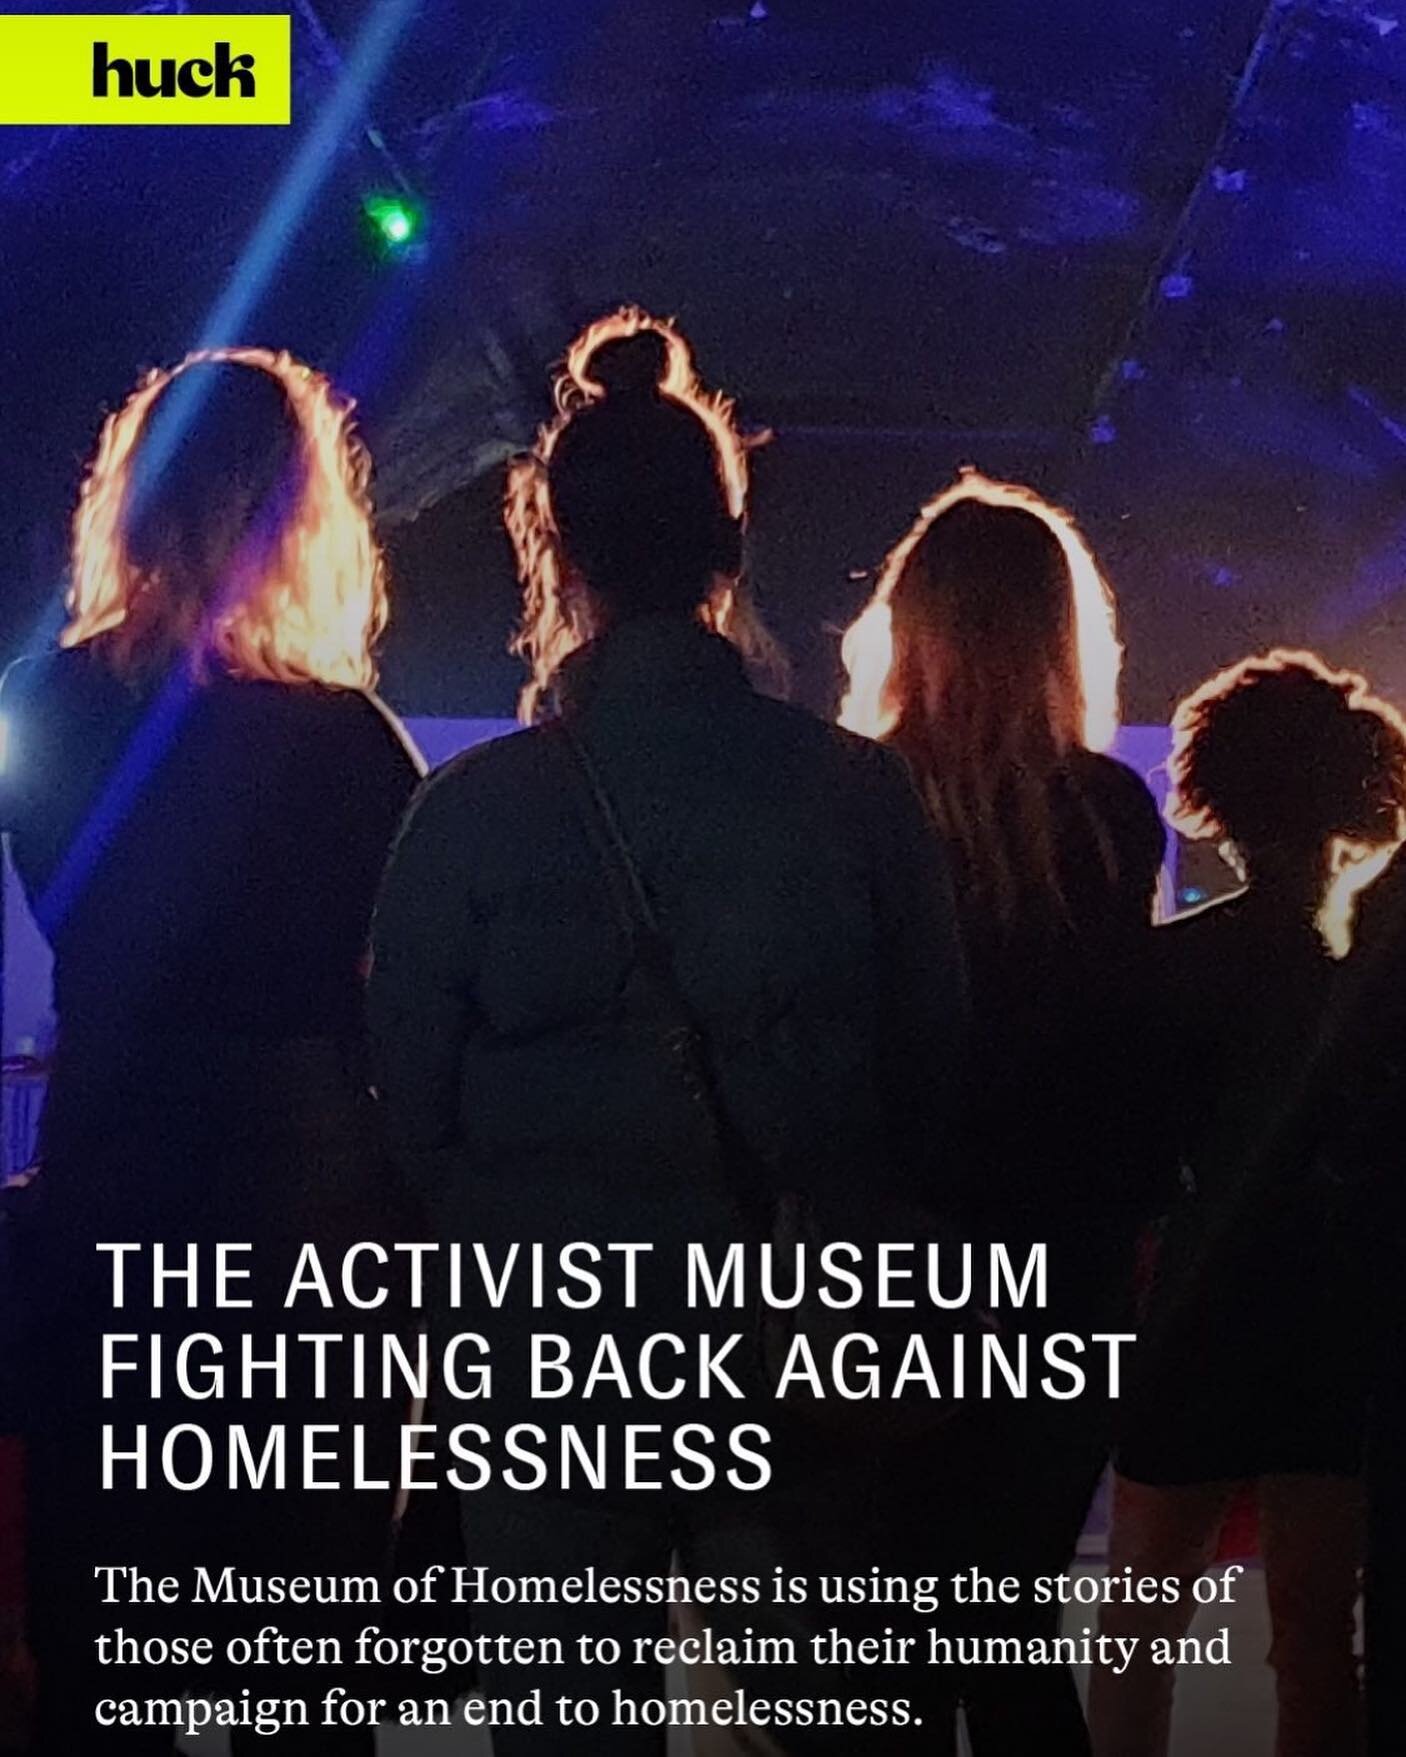 Excellent article published in @huckmagazine about our friends and allies @our_moh museum activism featuring quotes from @thepeoplesrecoveryproject trustee and @lifeatkings research fellow Jess Harris and our community member Mariusz.

We continue ou